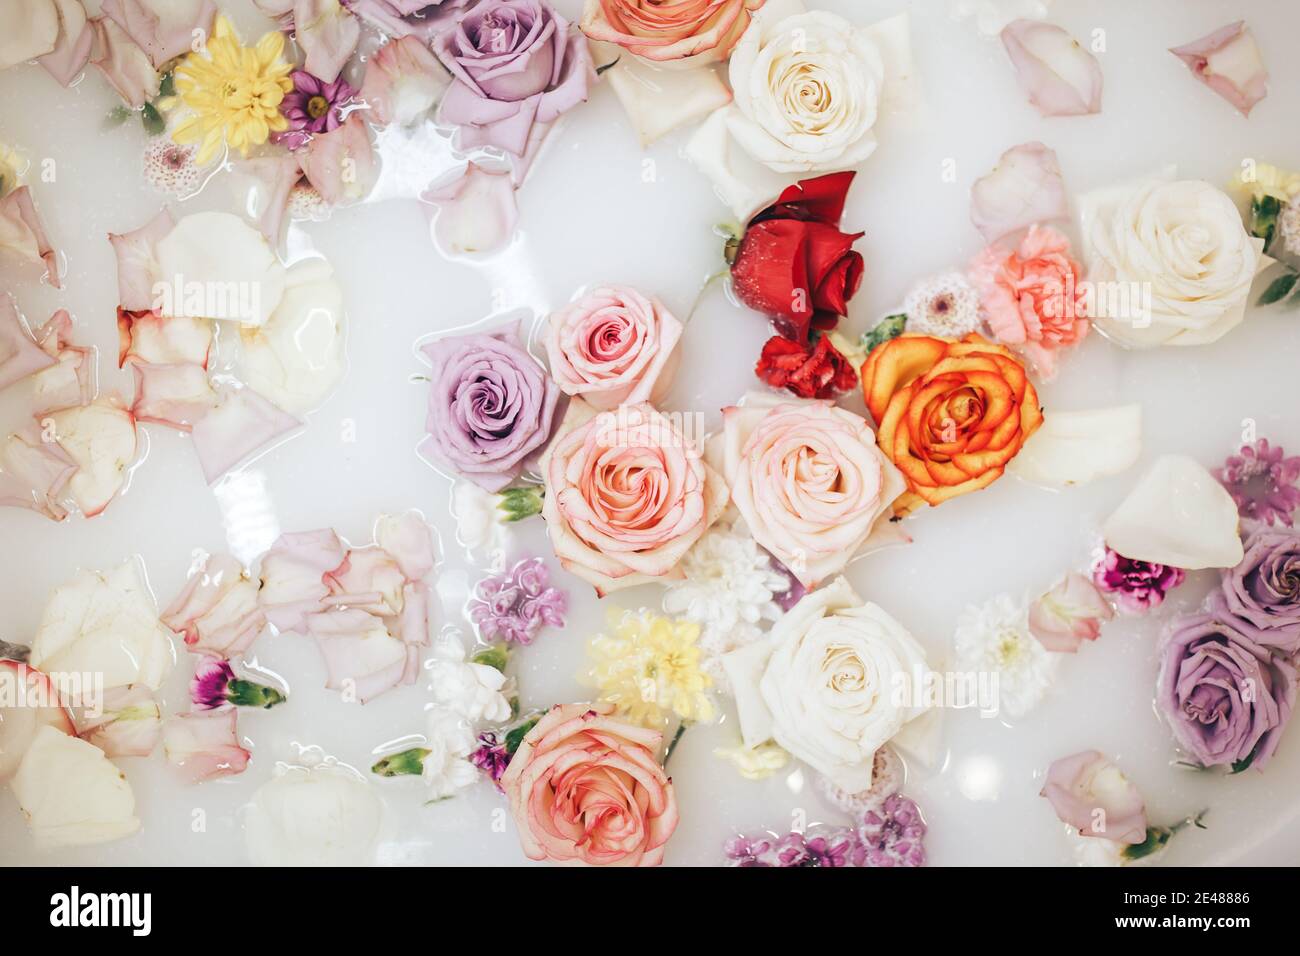 Wellness baths filled with milk. The buds of multi-colored roses float on the surface. Relaxing and anti-aging treatments.. Stock Photo